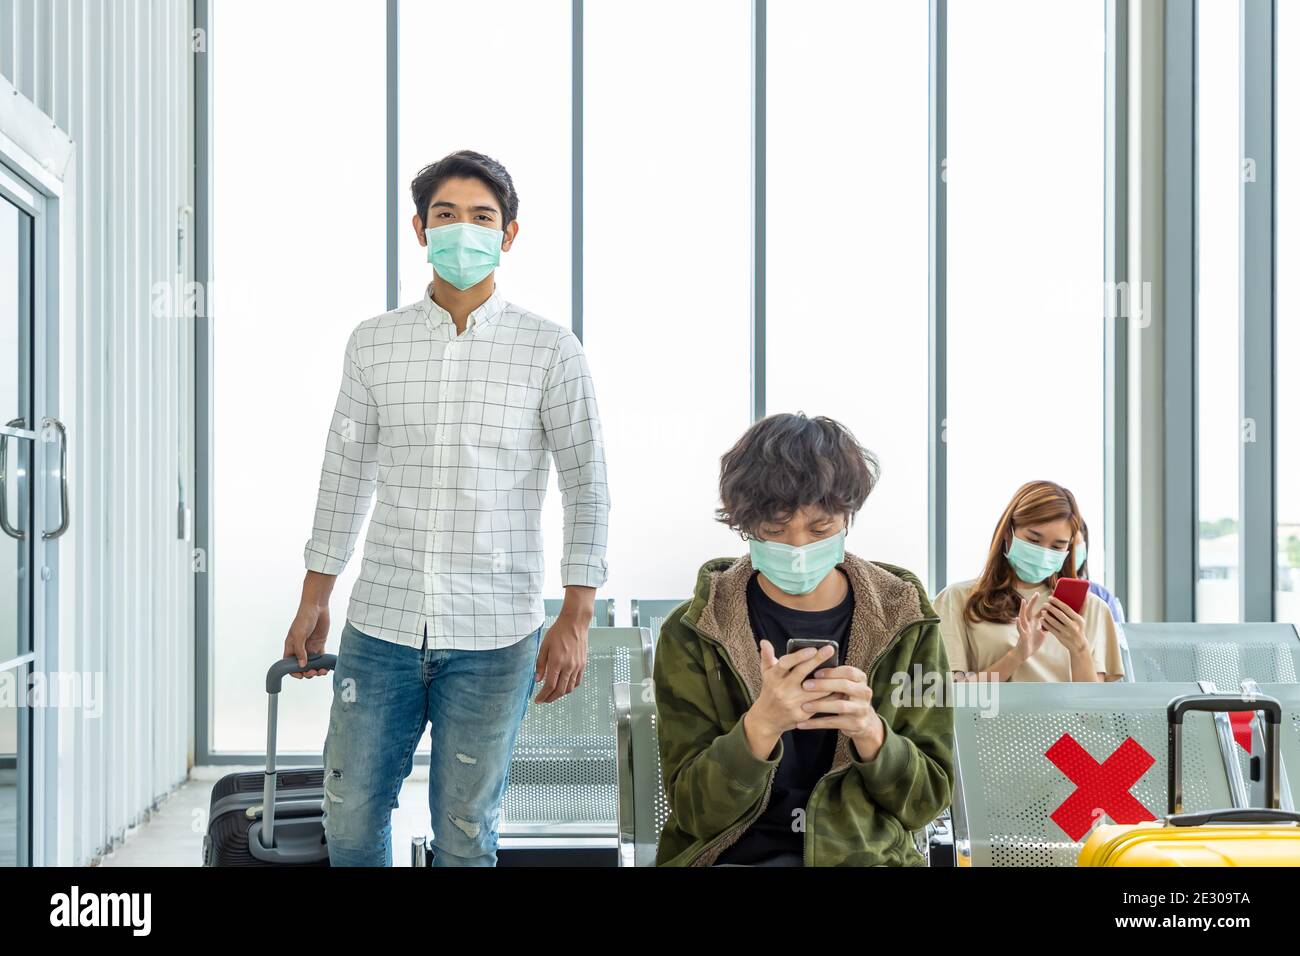 Travelers wearing protective mask in International airport, during Covid-19 pandemic, safety with social distancing protocol, new normal travel concep Stock Photo